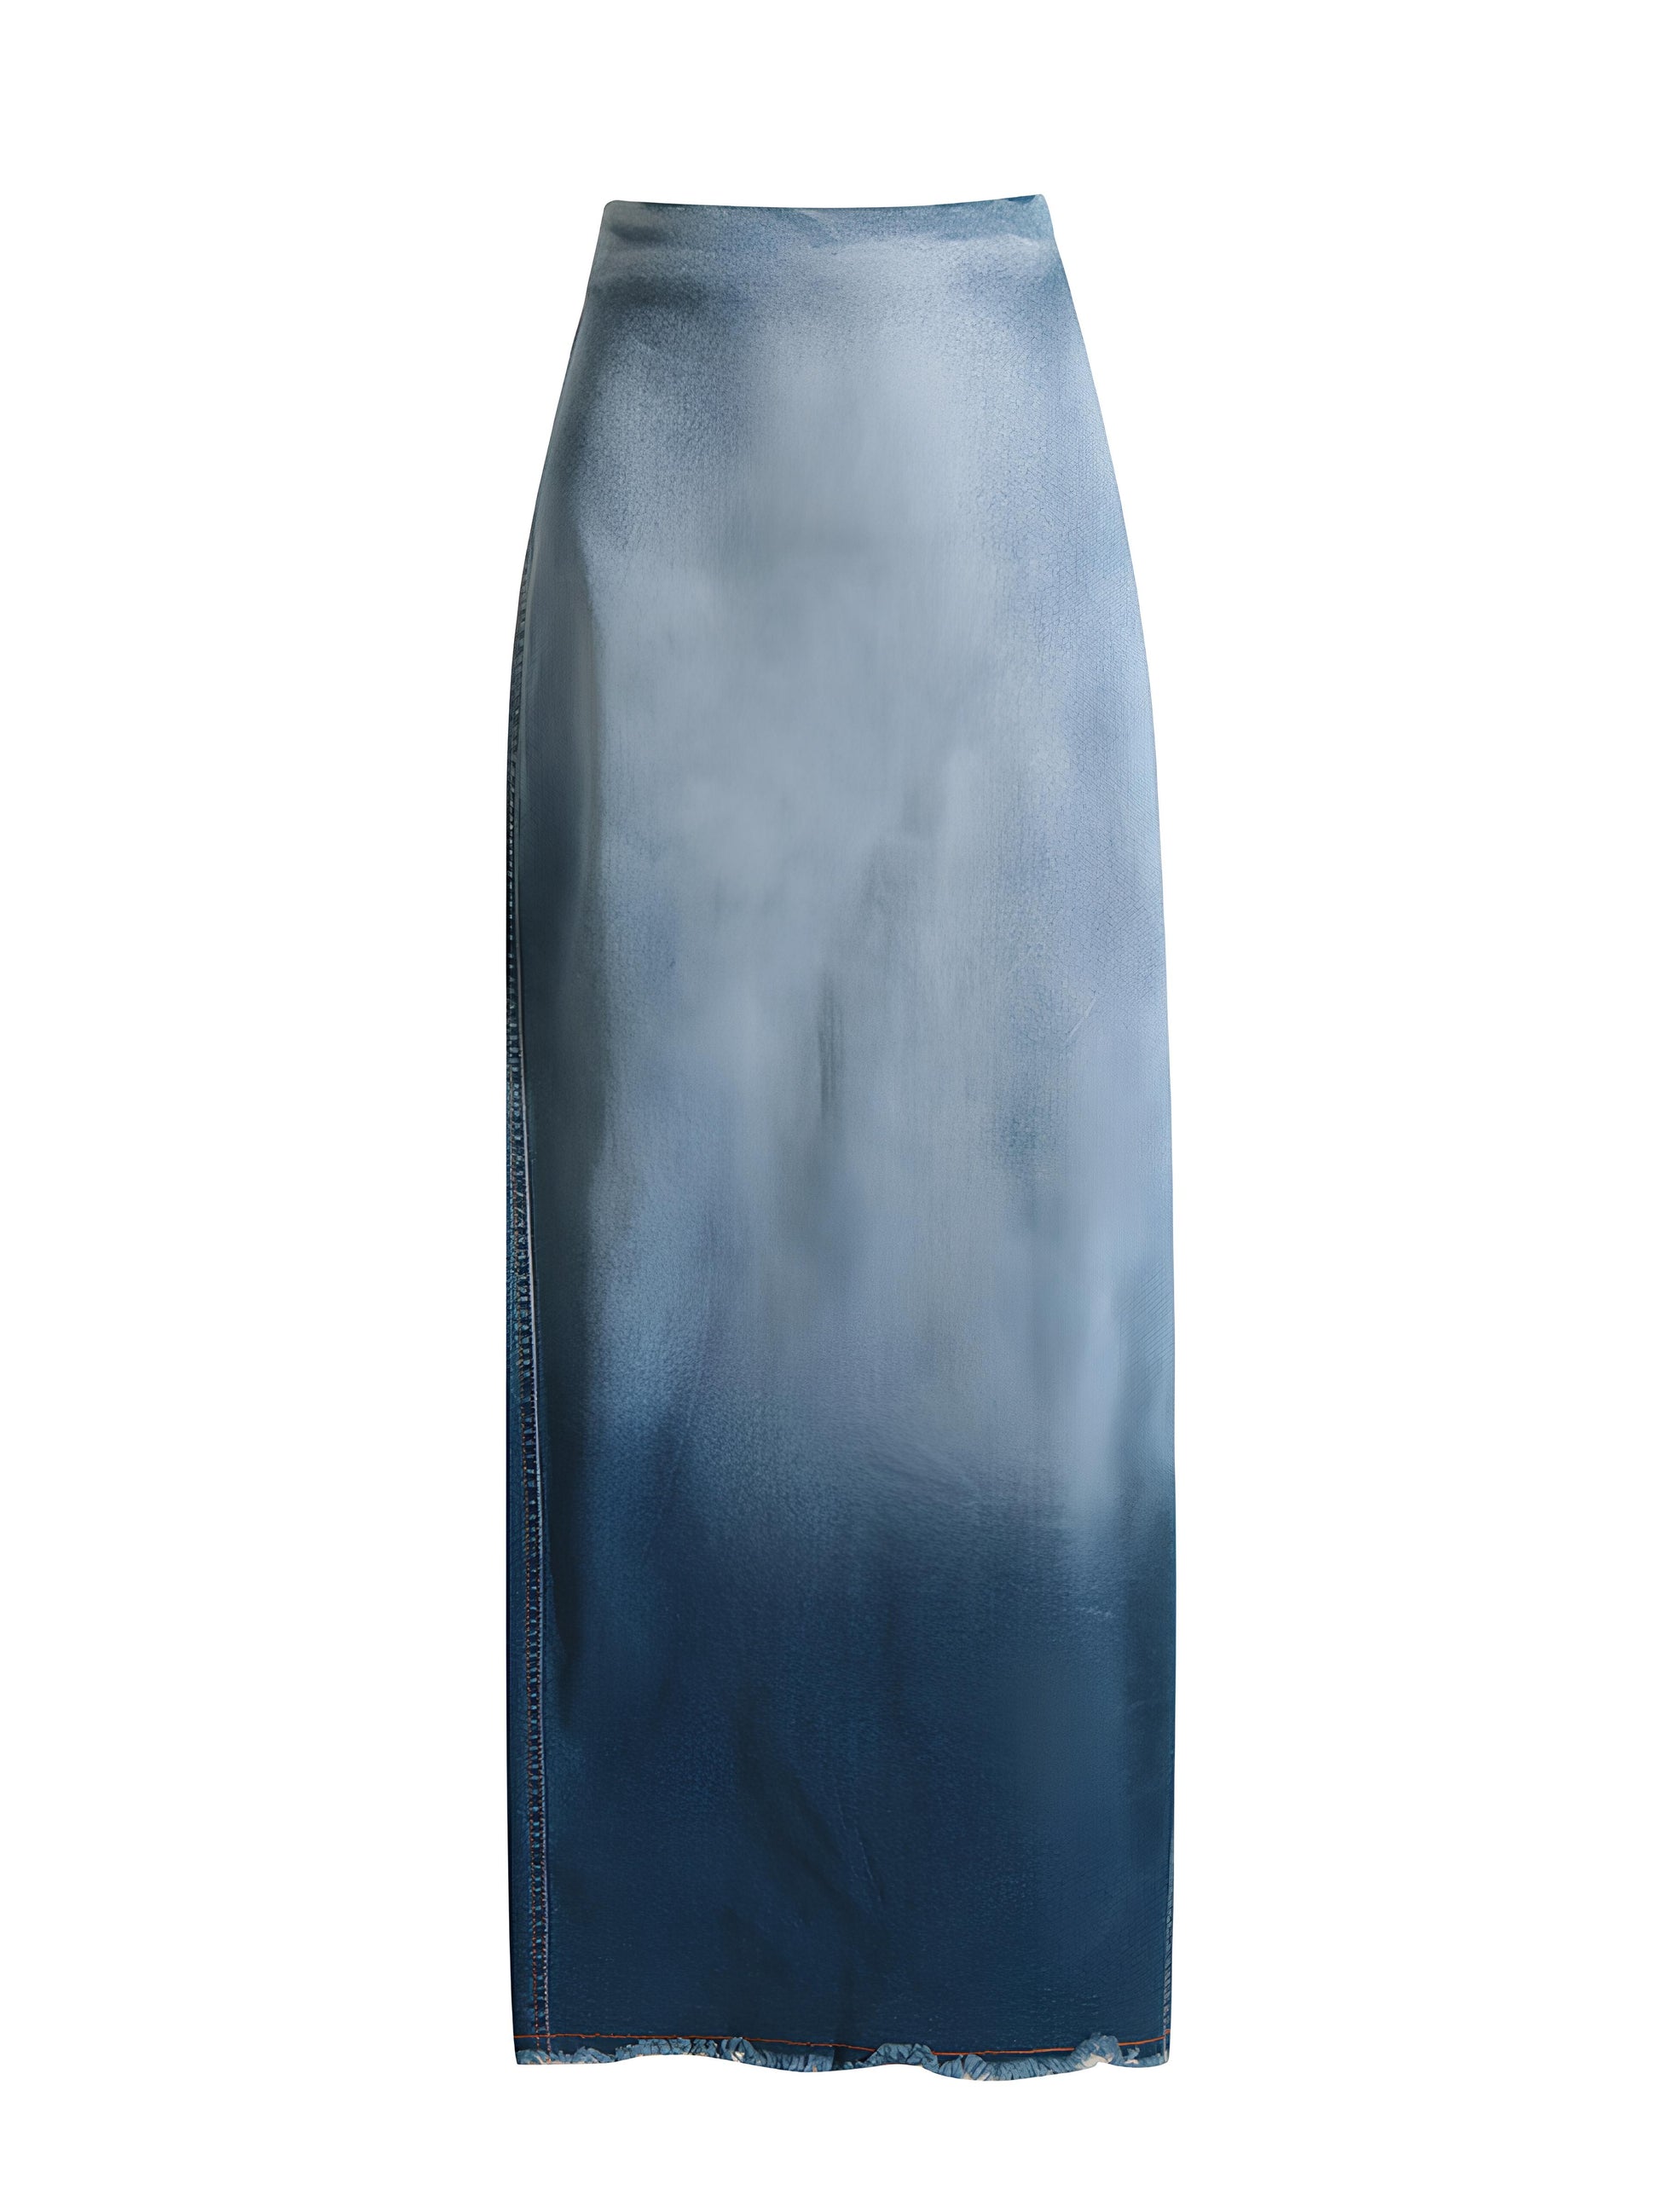 A long denim skirt in classic two-tone blue made from luxurious premium cotton-polyester blend fabric. The flattering fit and timeless style make this skirt a wardrobe staple. Perfect for a casual day out or day in.